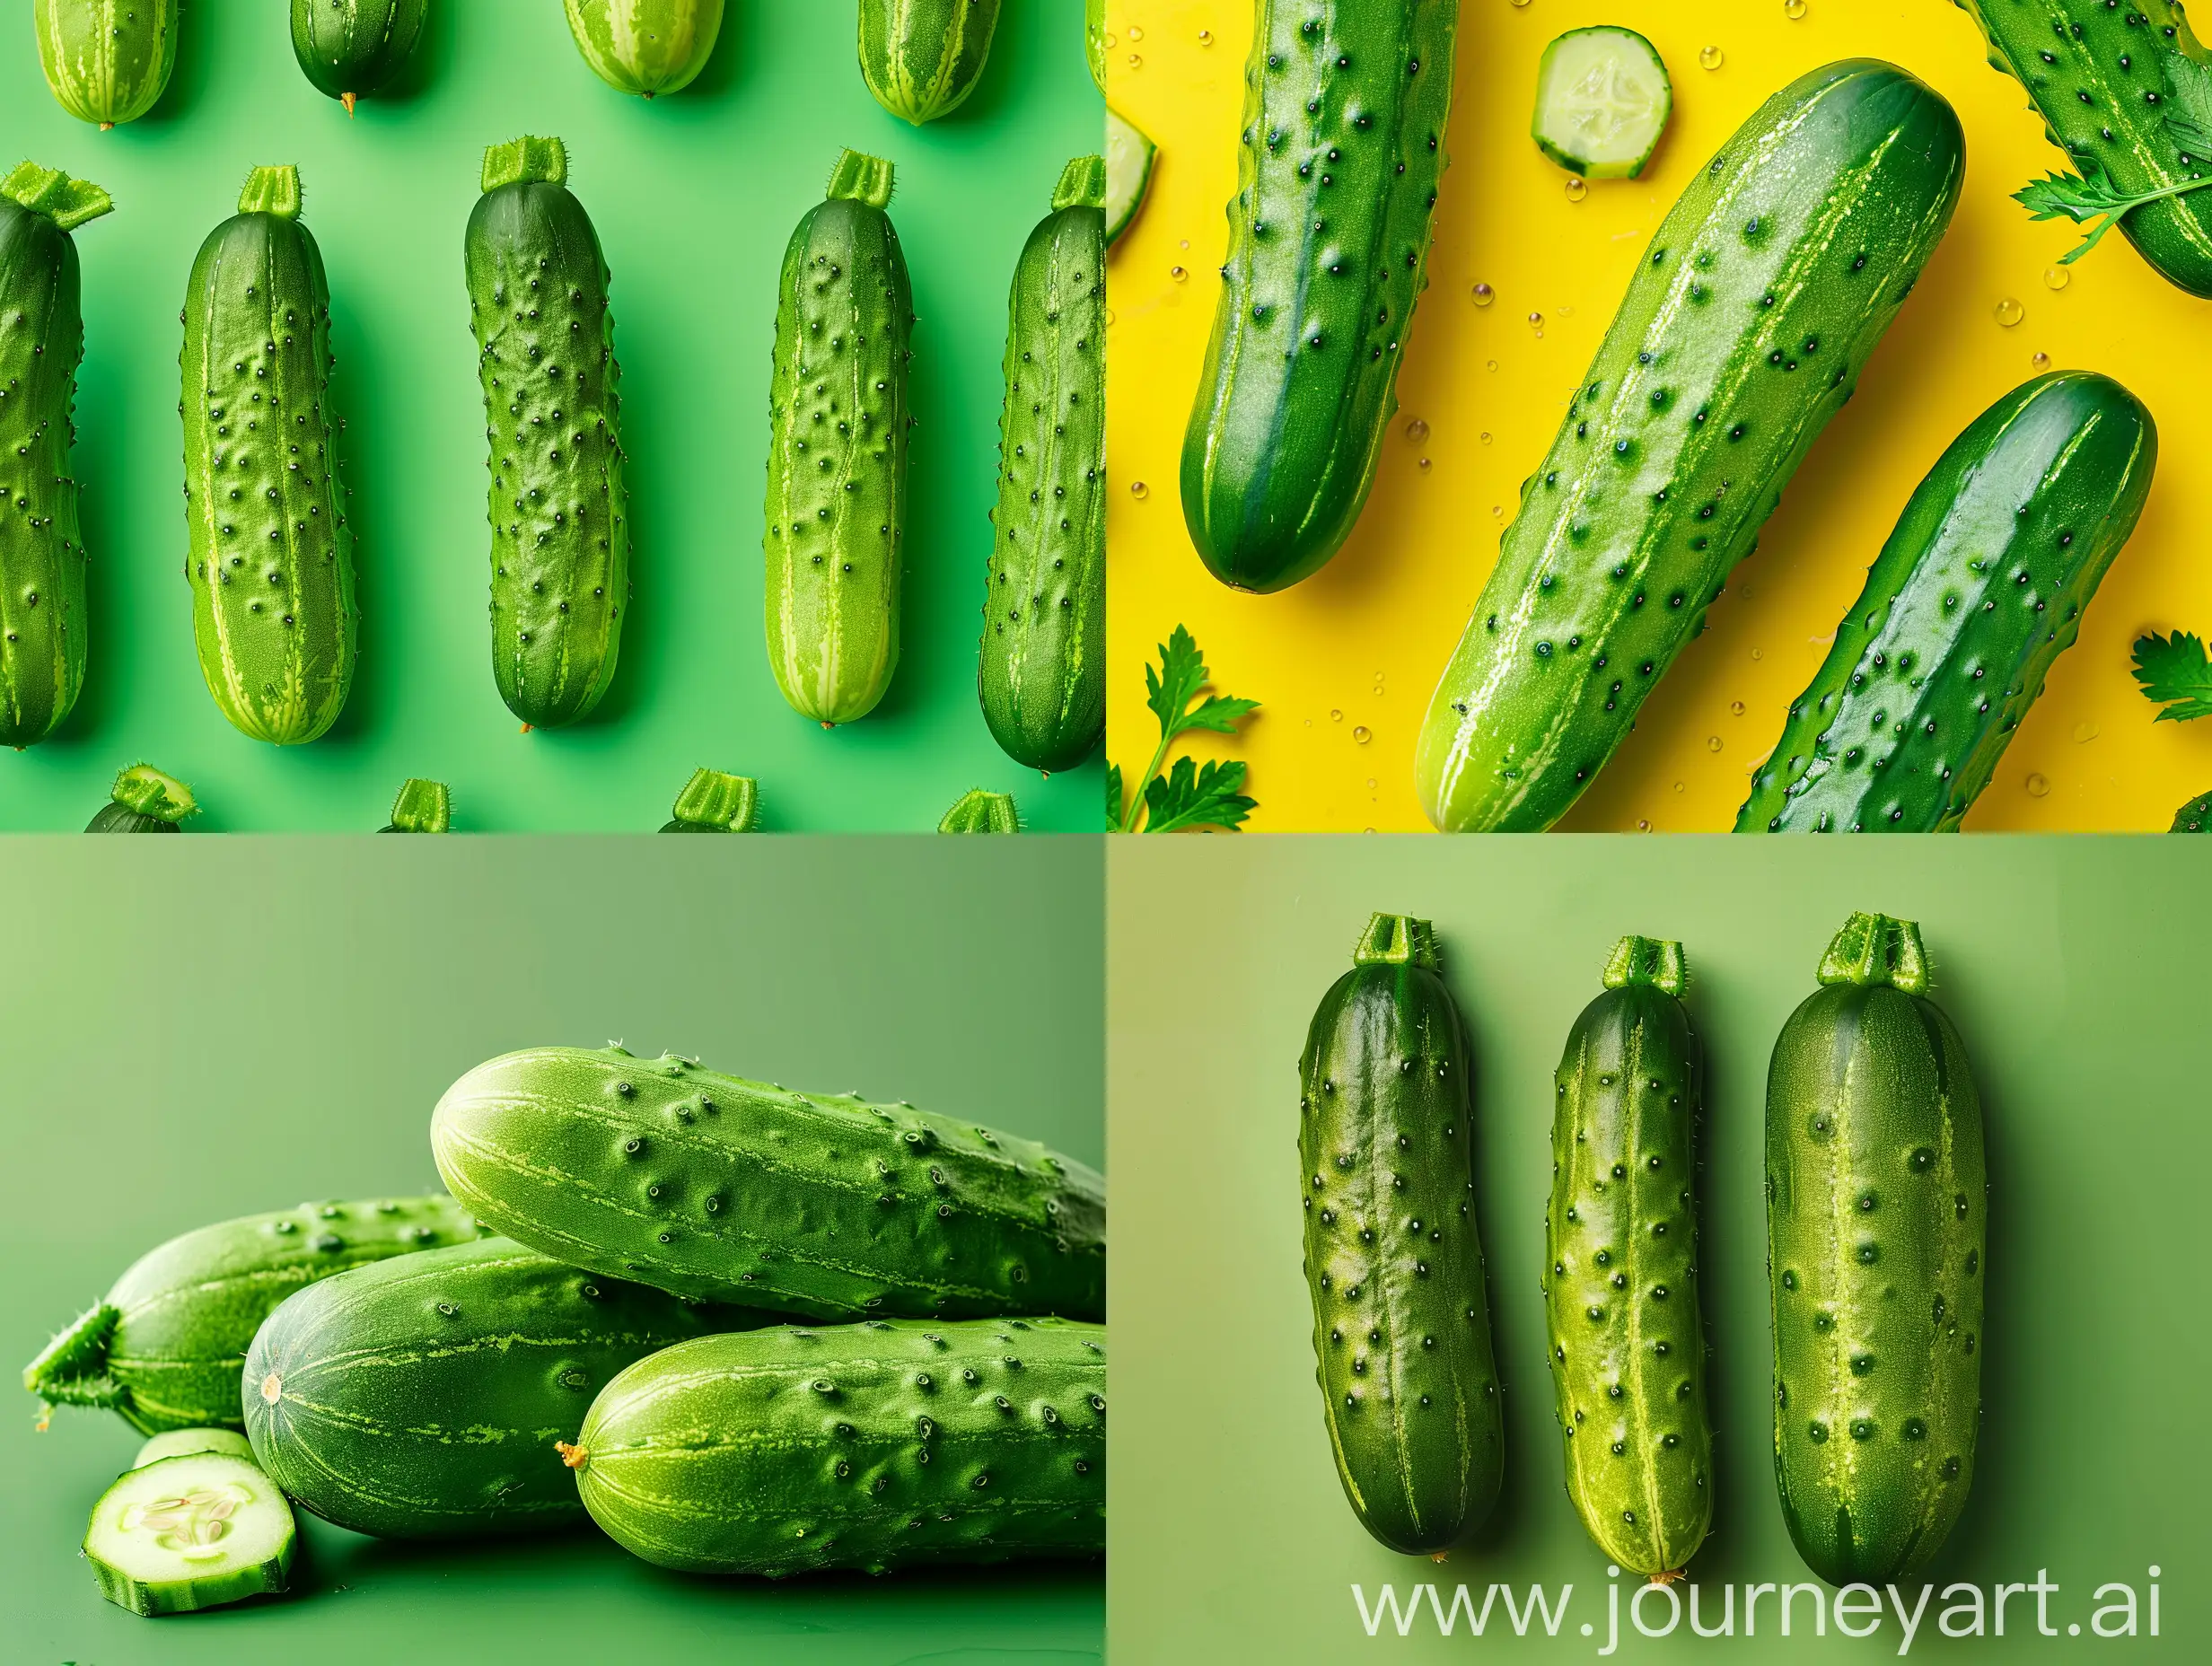 Studio photography with a background of one color of cucumber